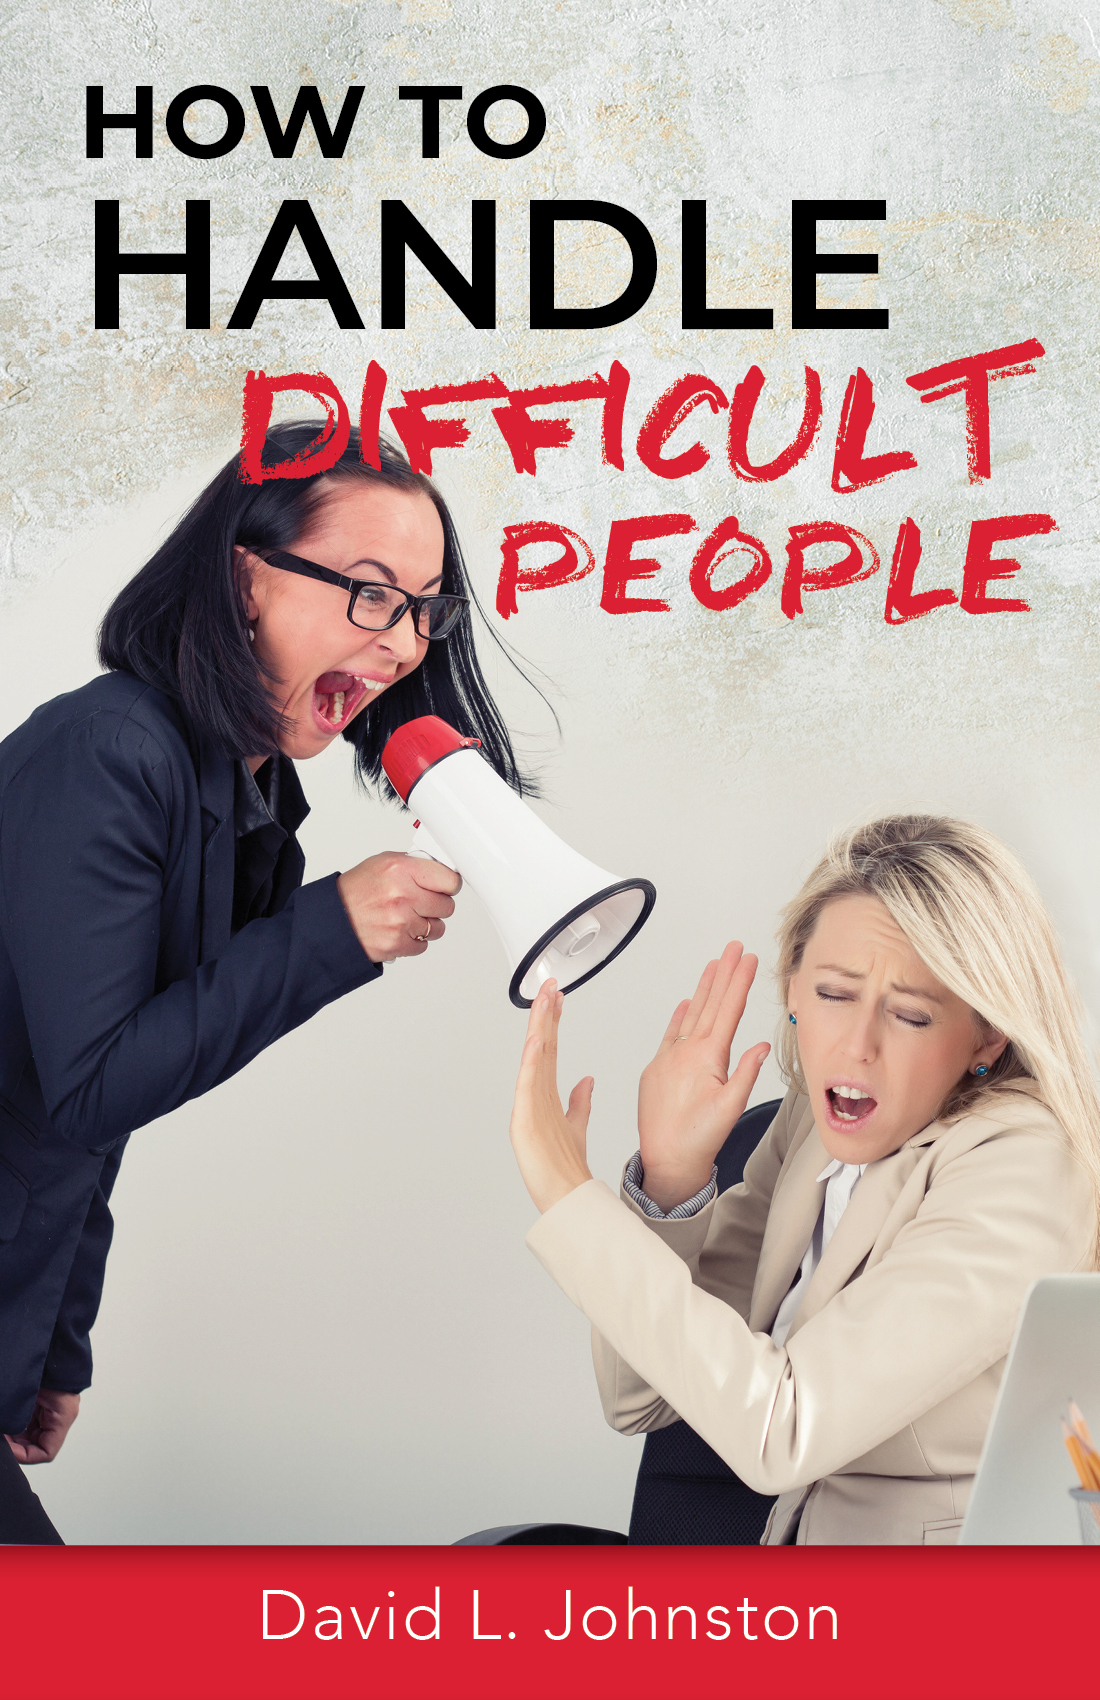 How to Handle Difficult People